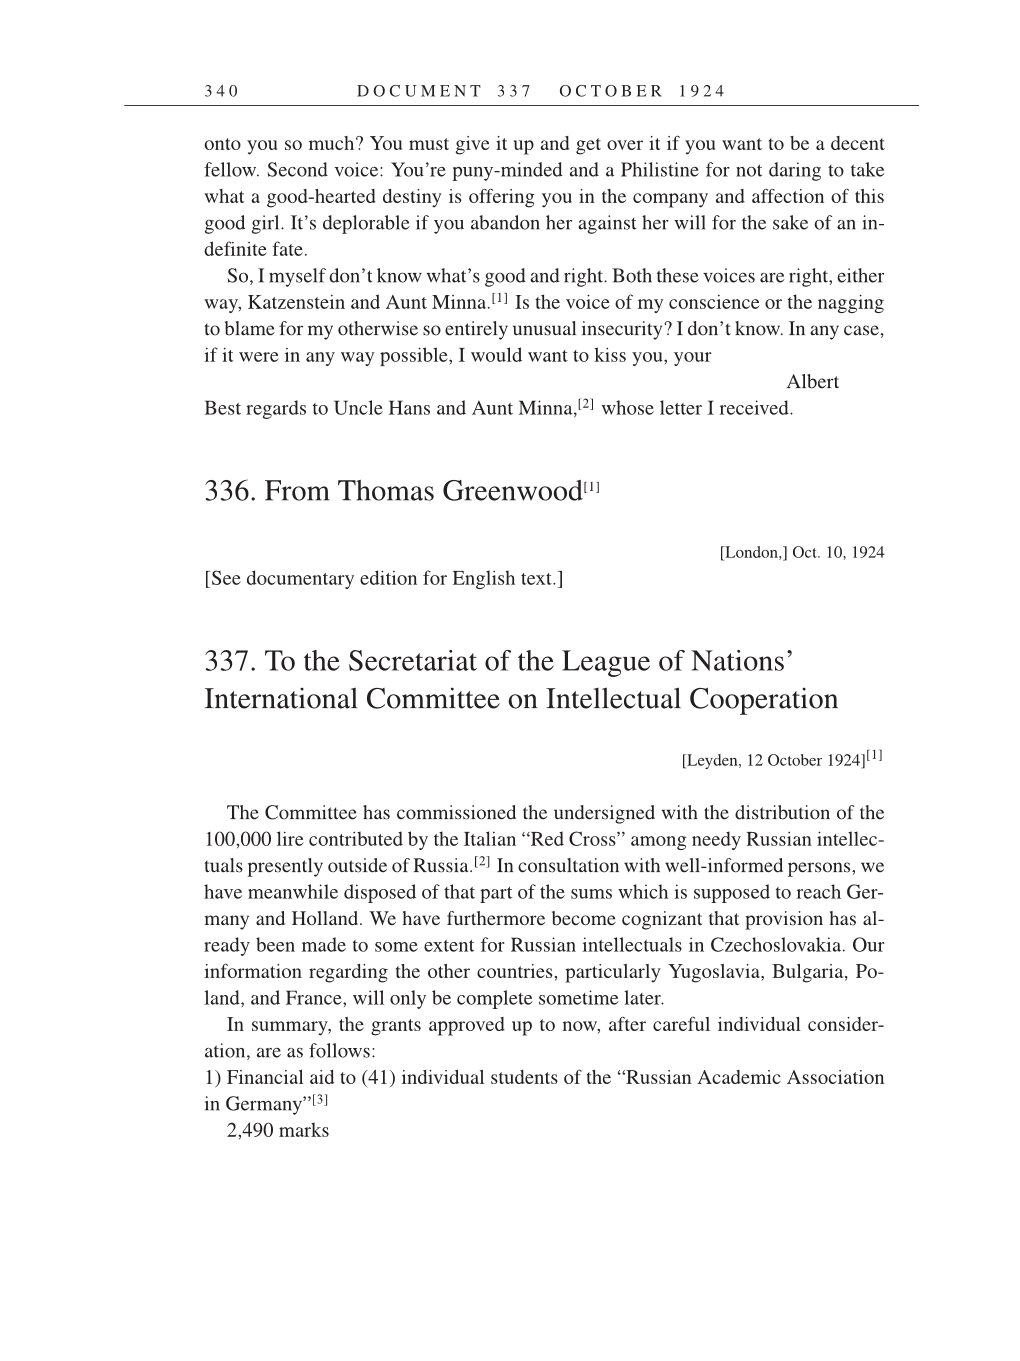 Volume 14: The Berlin Years: Writings & Correspondence, April 1923-May 1925 (English Translation Supplement) page 340